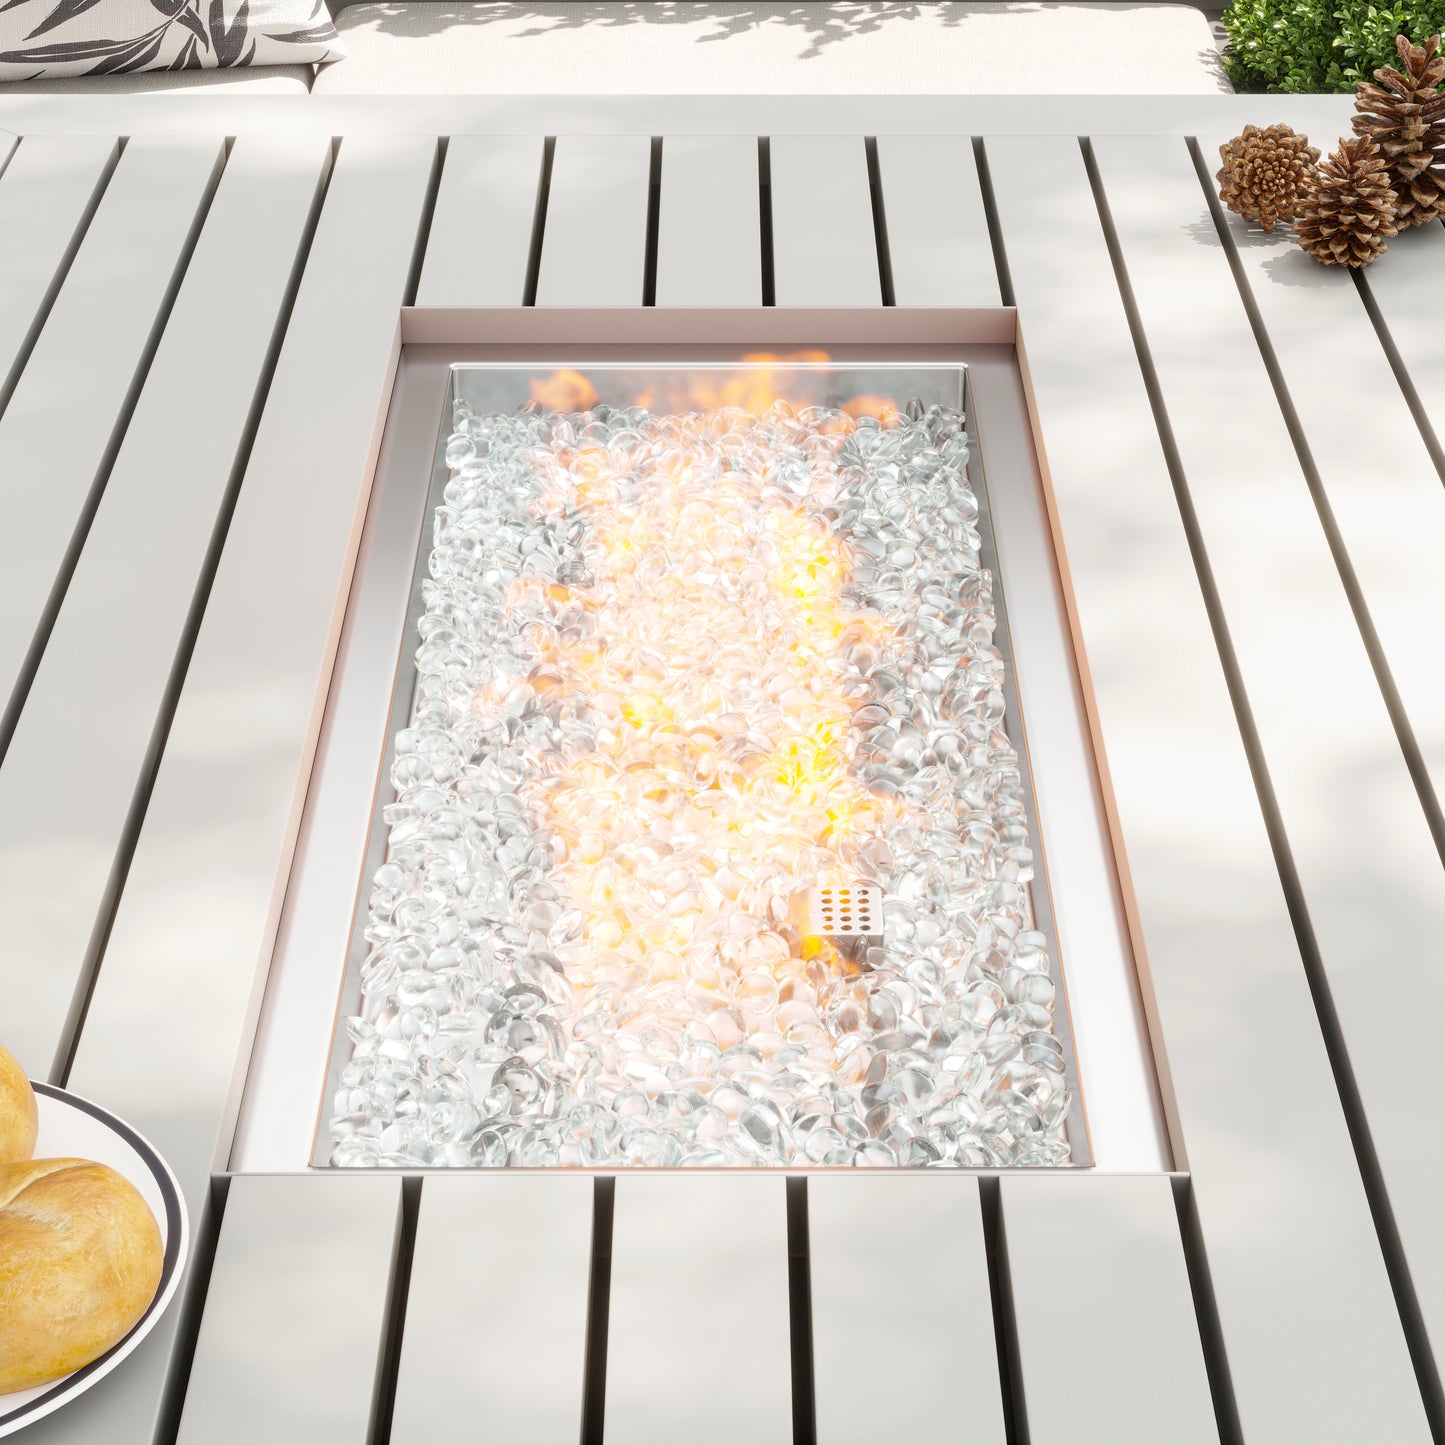 Soho Aluminum Propane Outdoor Fire Pit Table with Lid